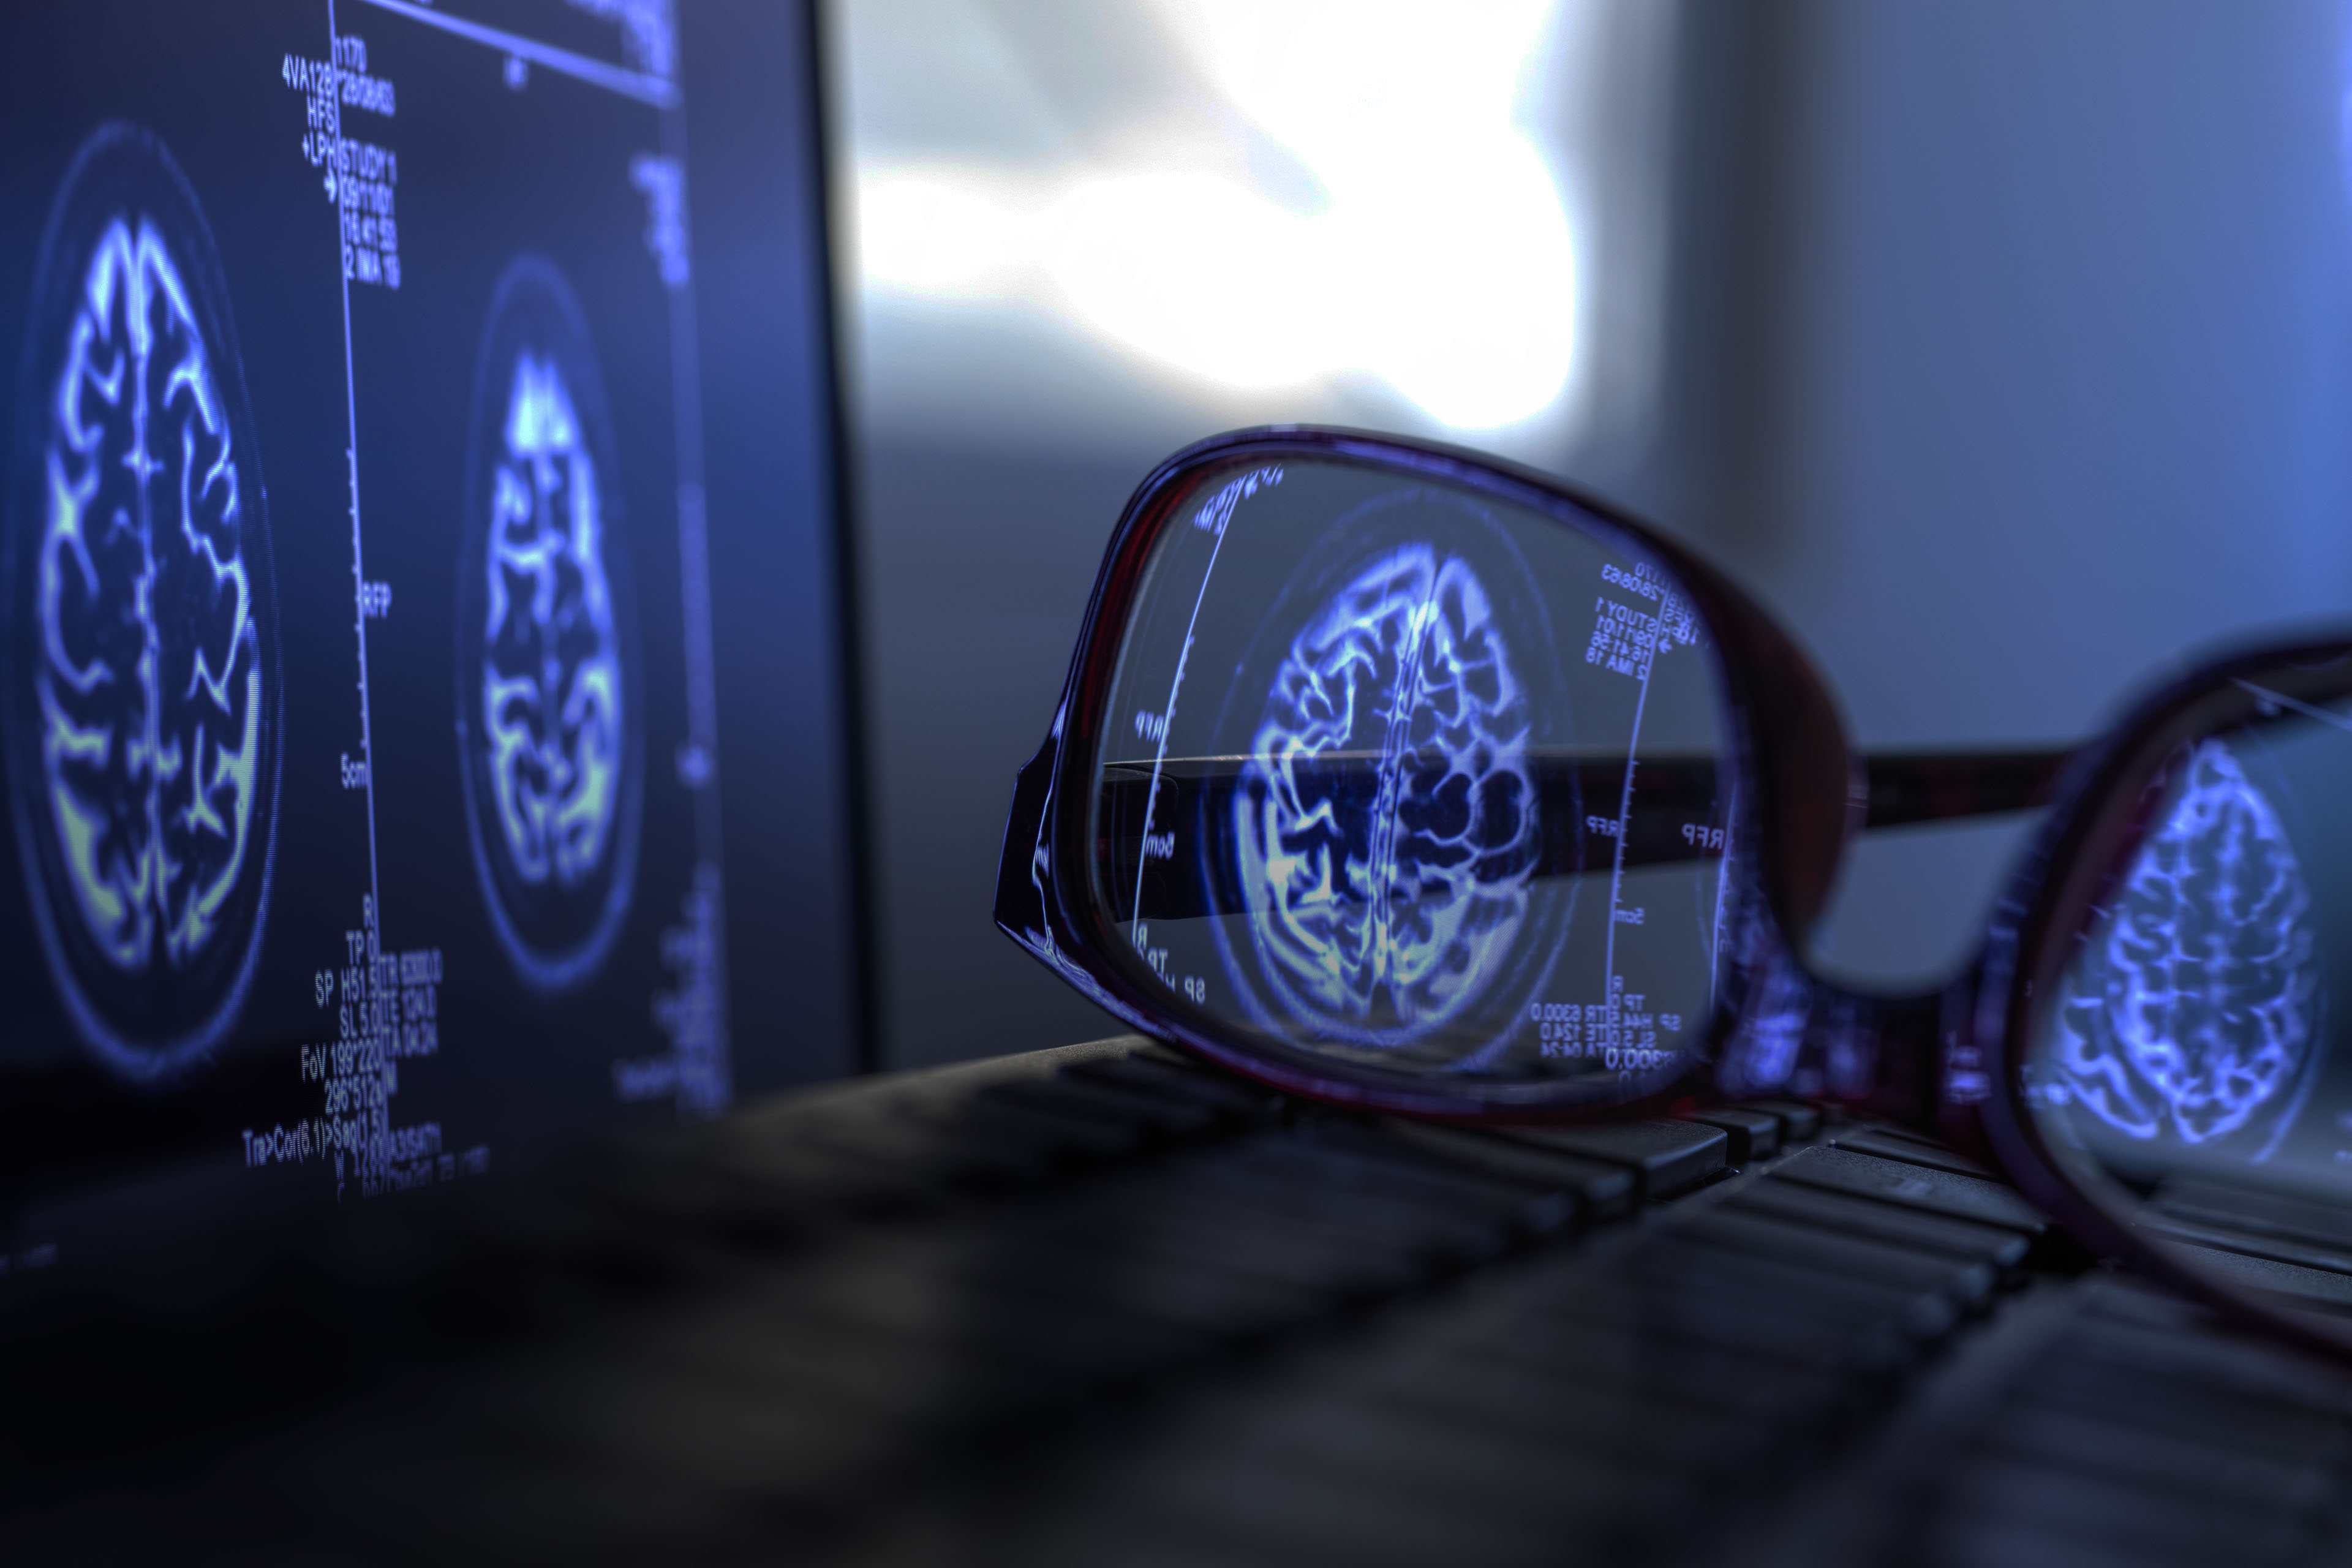 ey-brain-scan-results-reflecting-in-protective-glasses Medical Companies: Unlocking the Power of Innovation